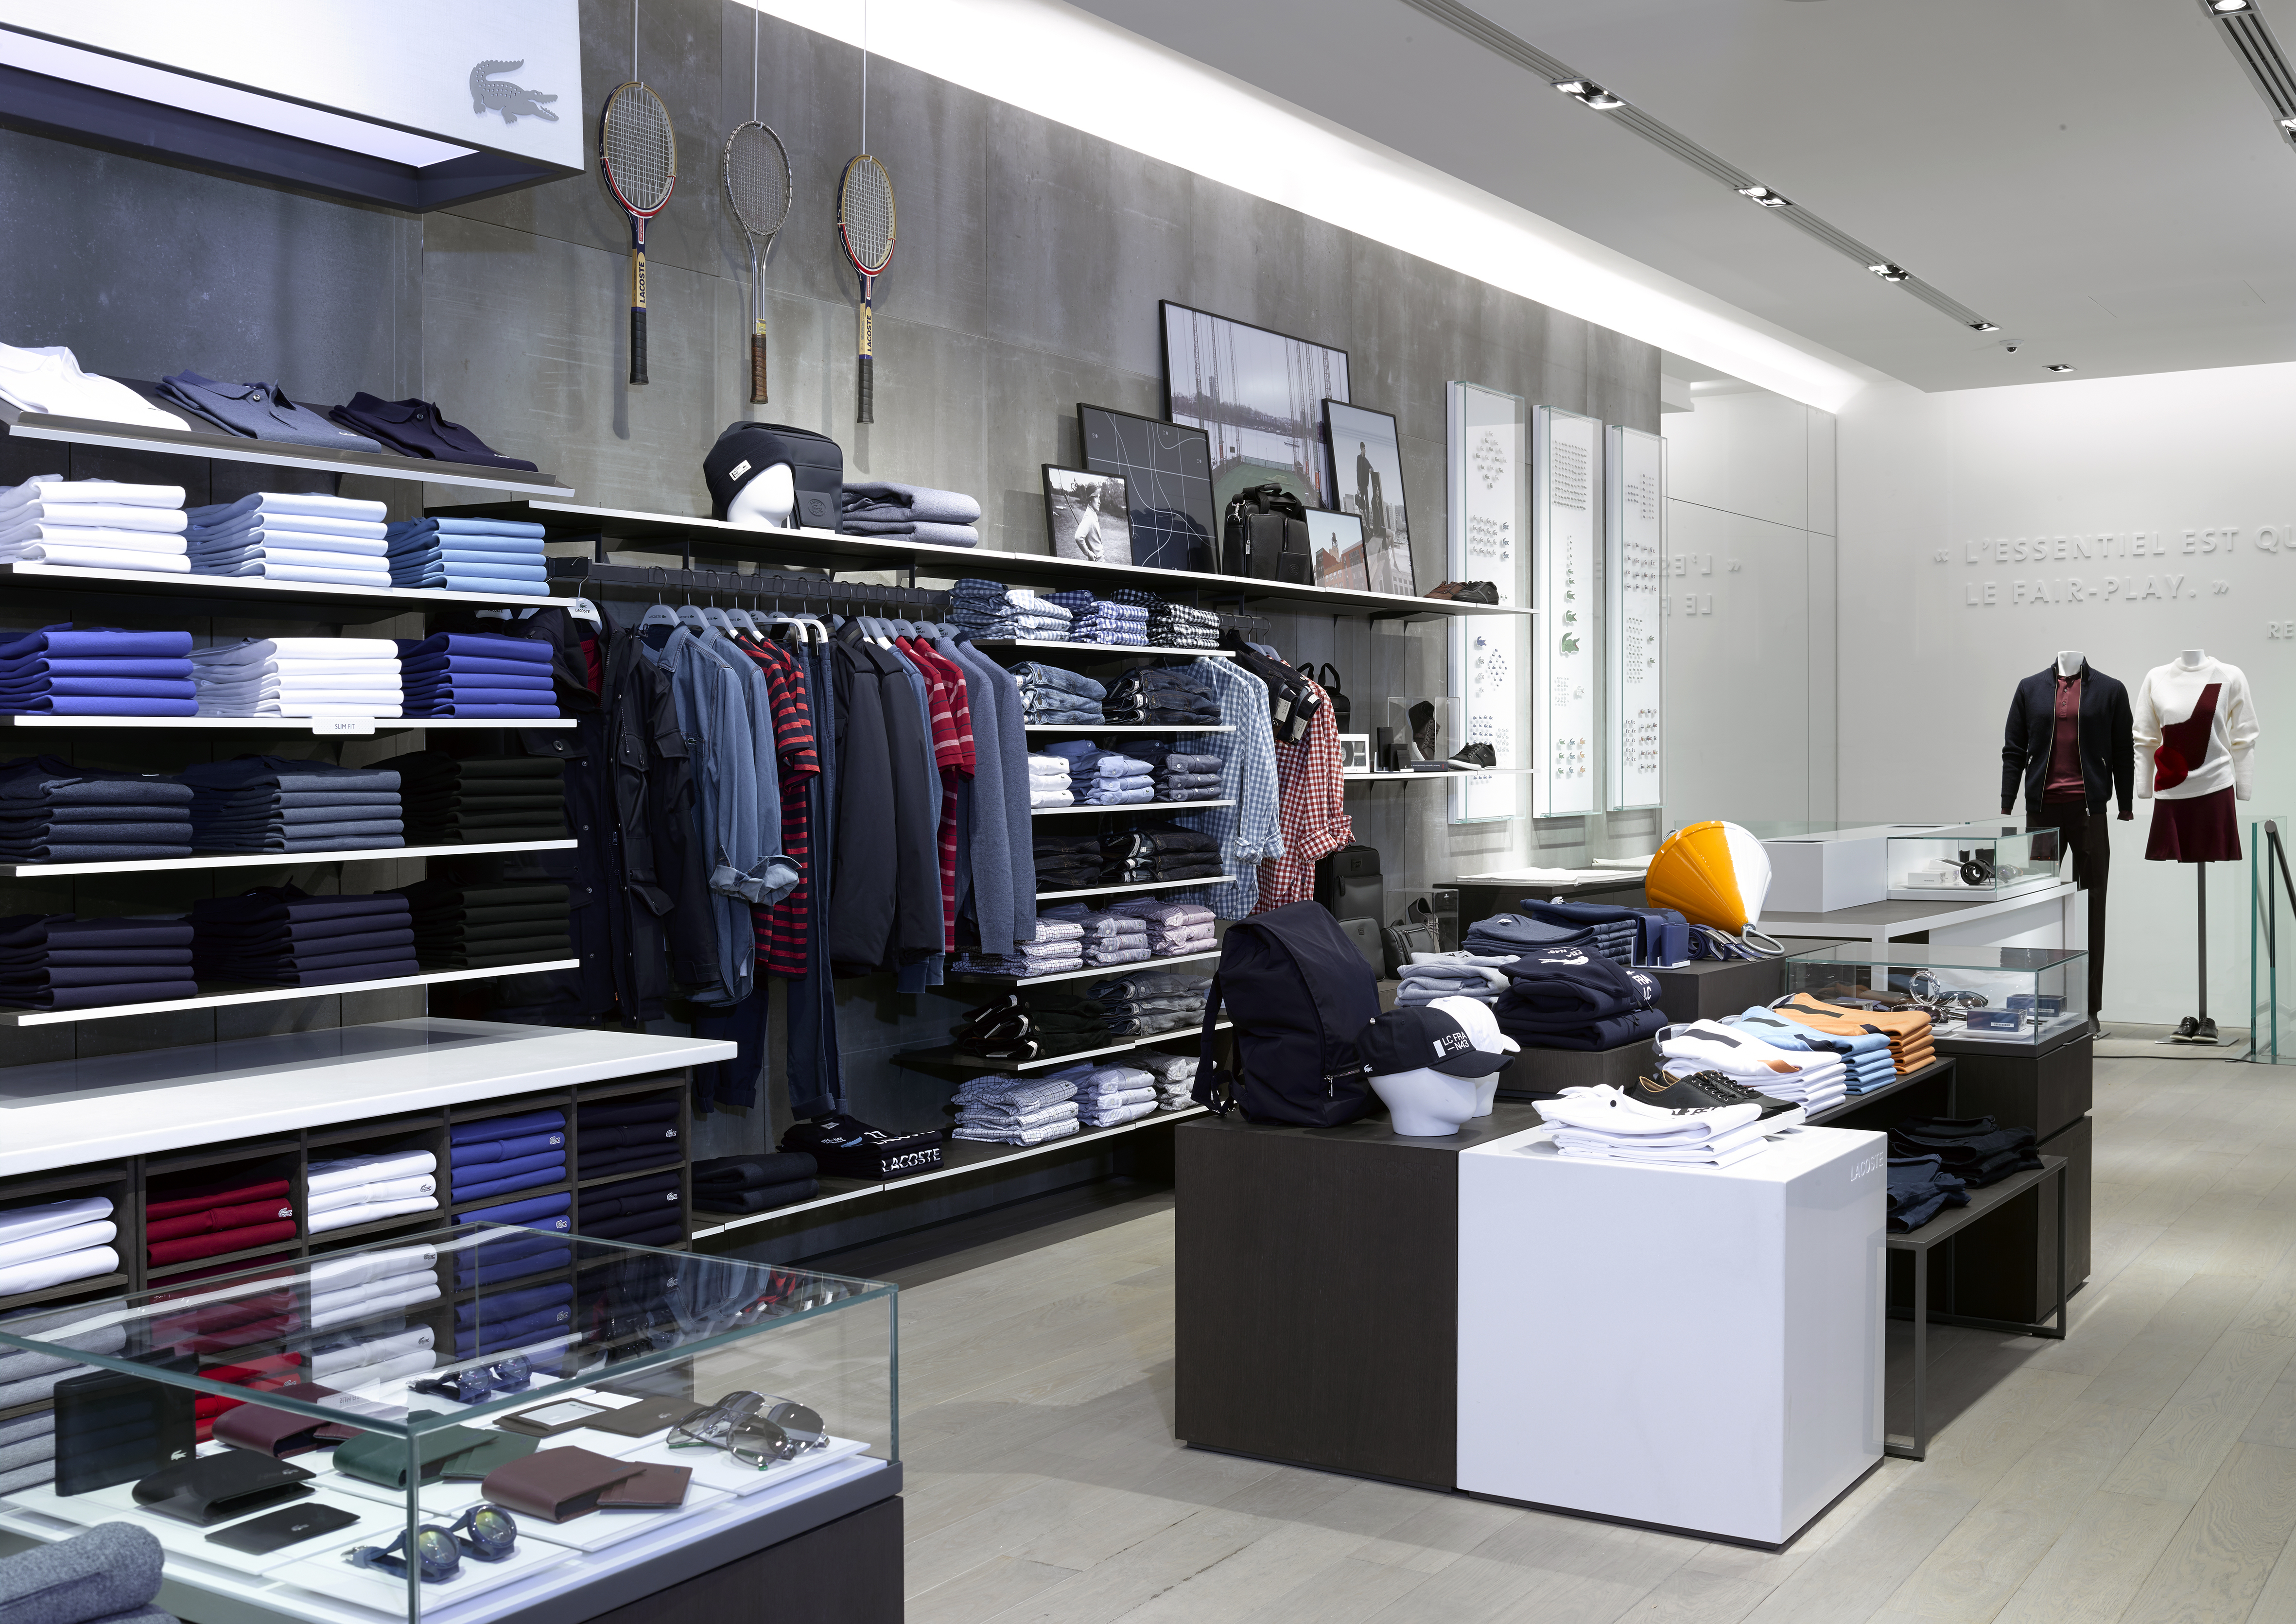 LACOSTE PRESENTS A NEW STORE CONCEPT 